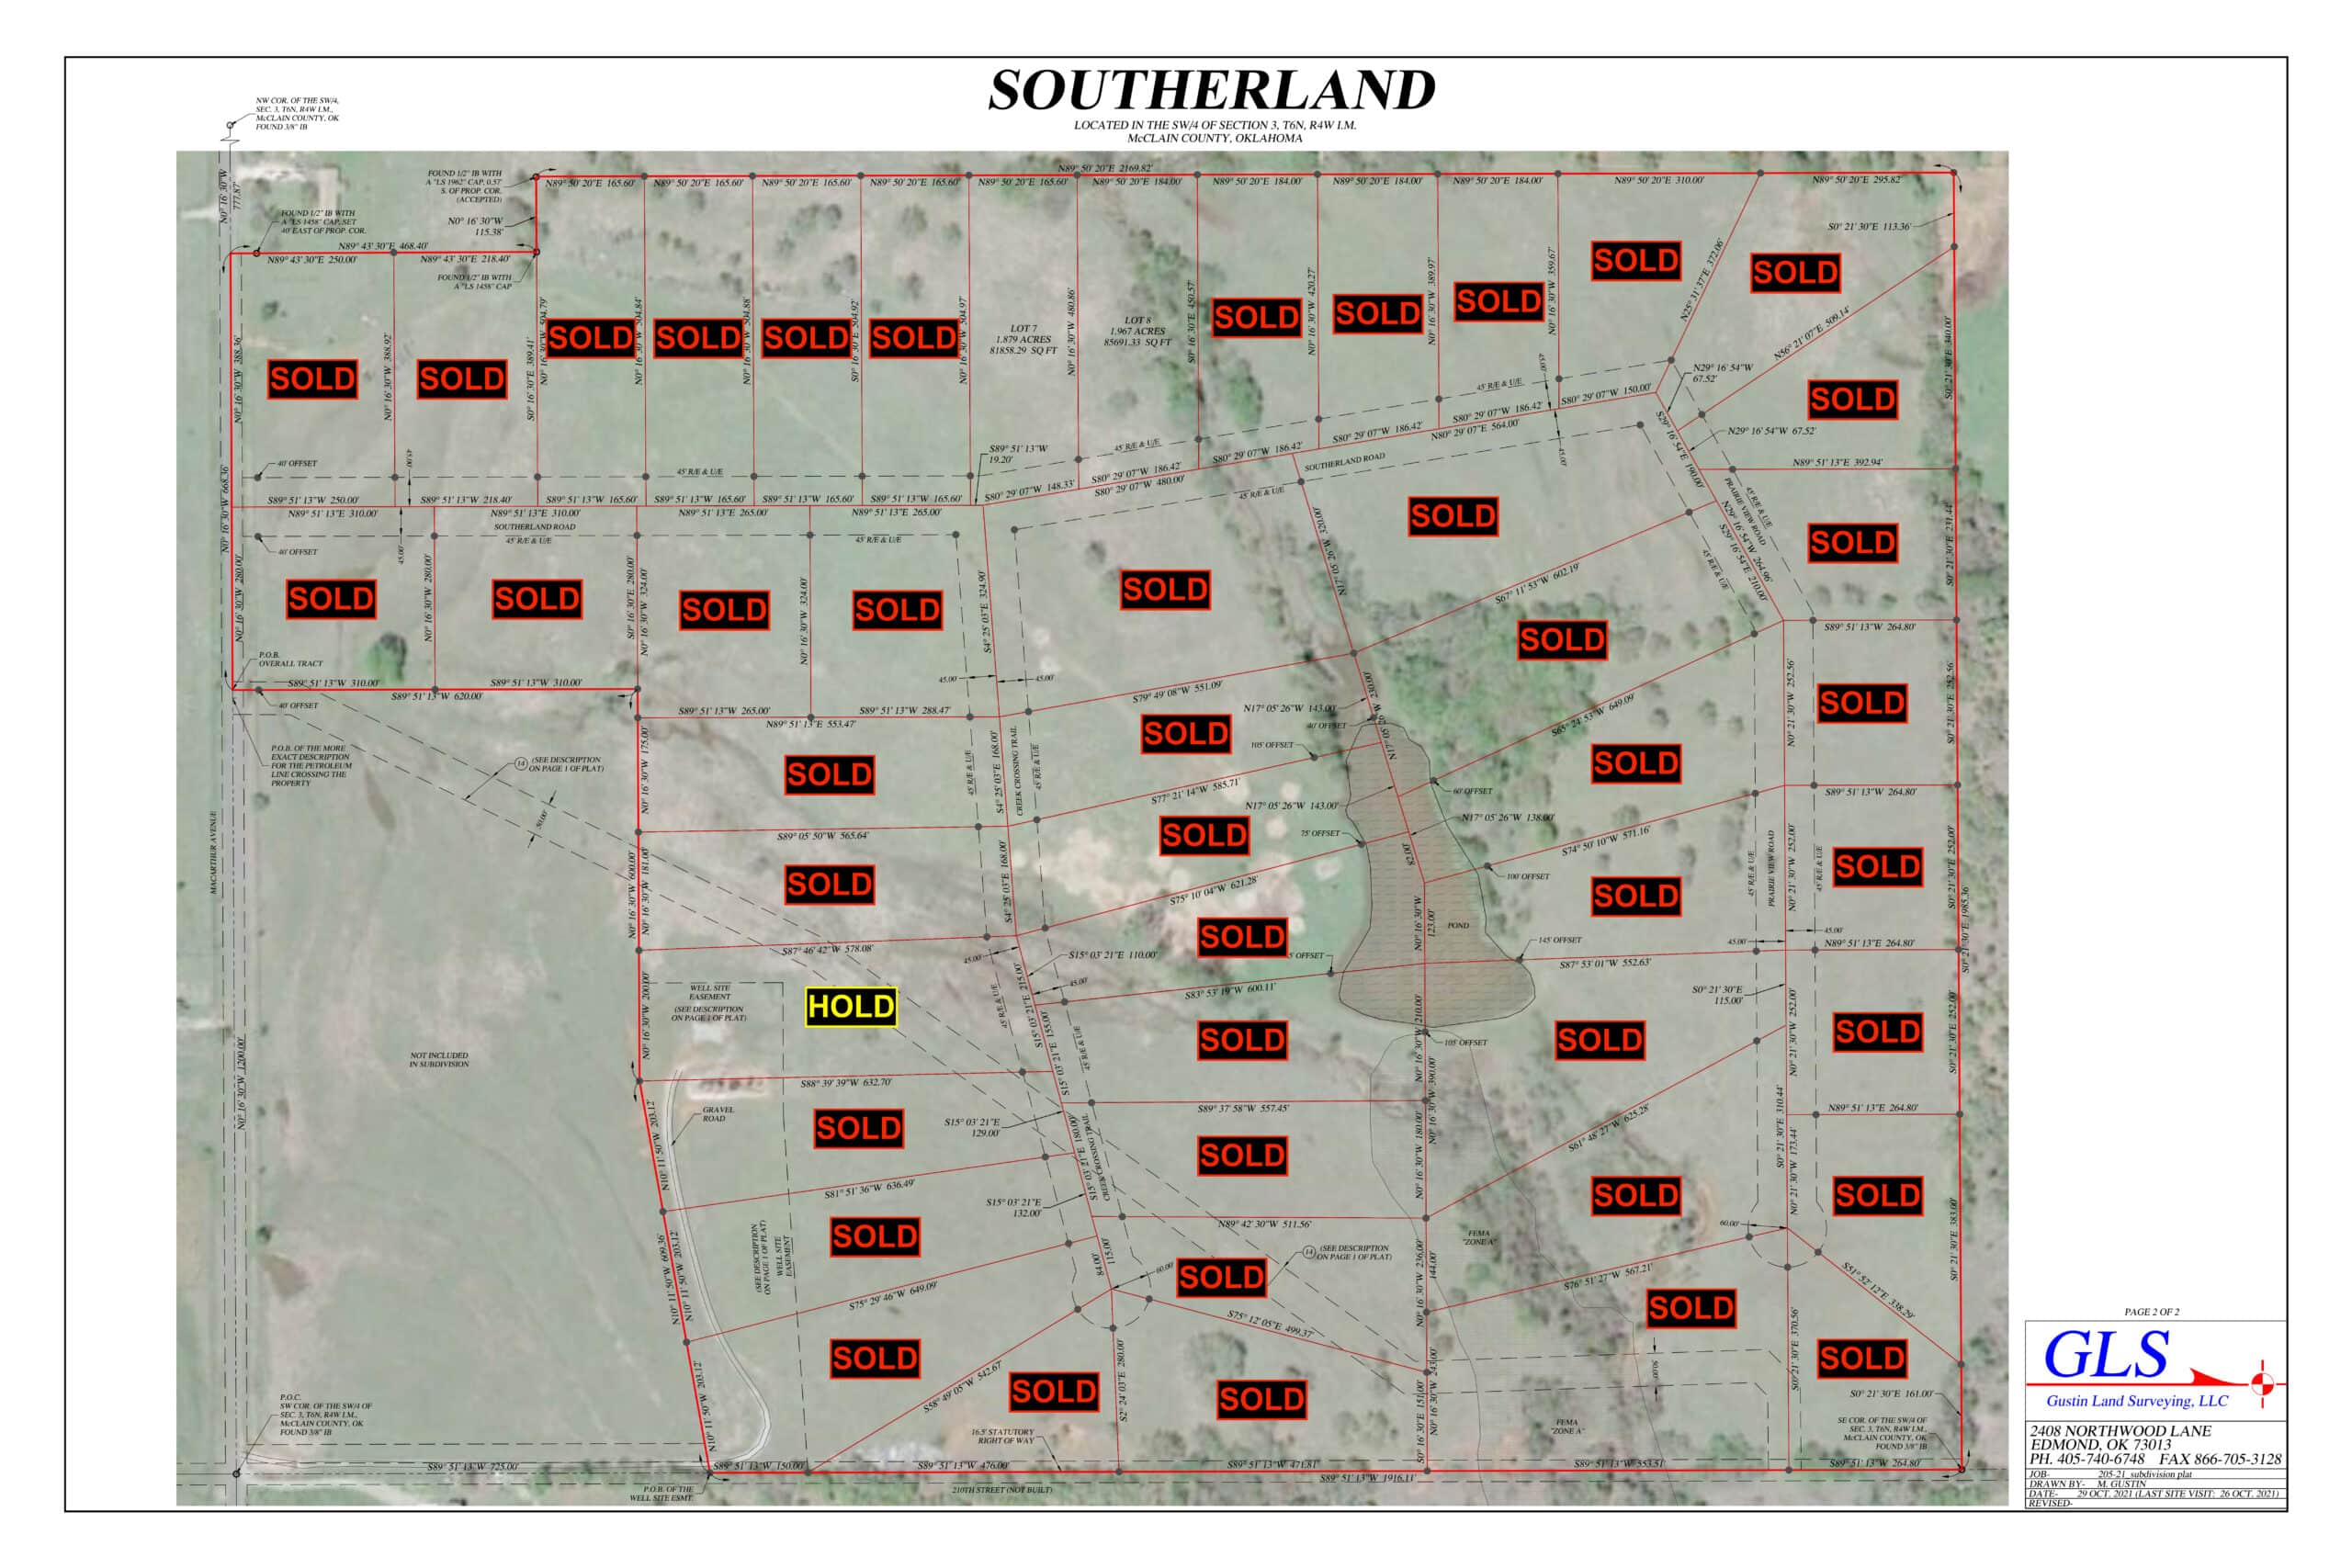 Southerland Aerial Survey